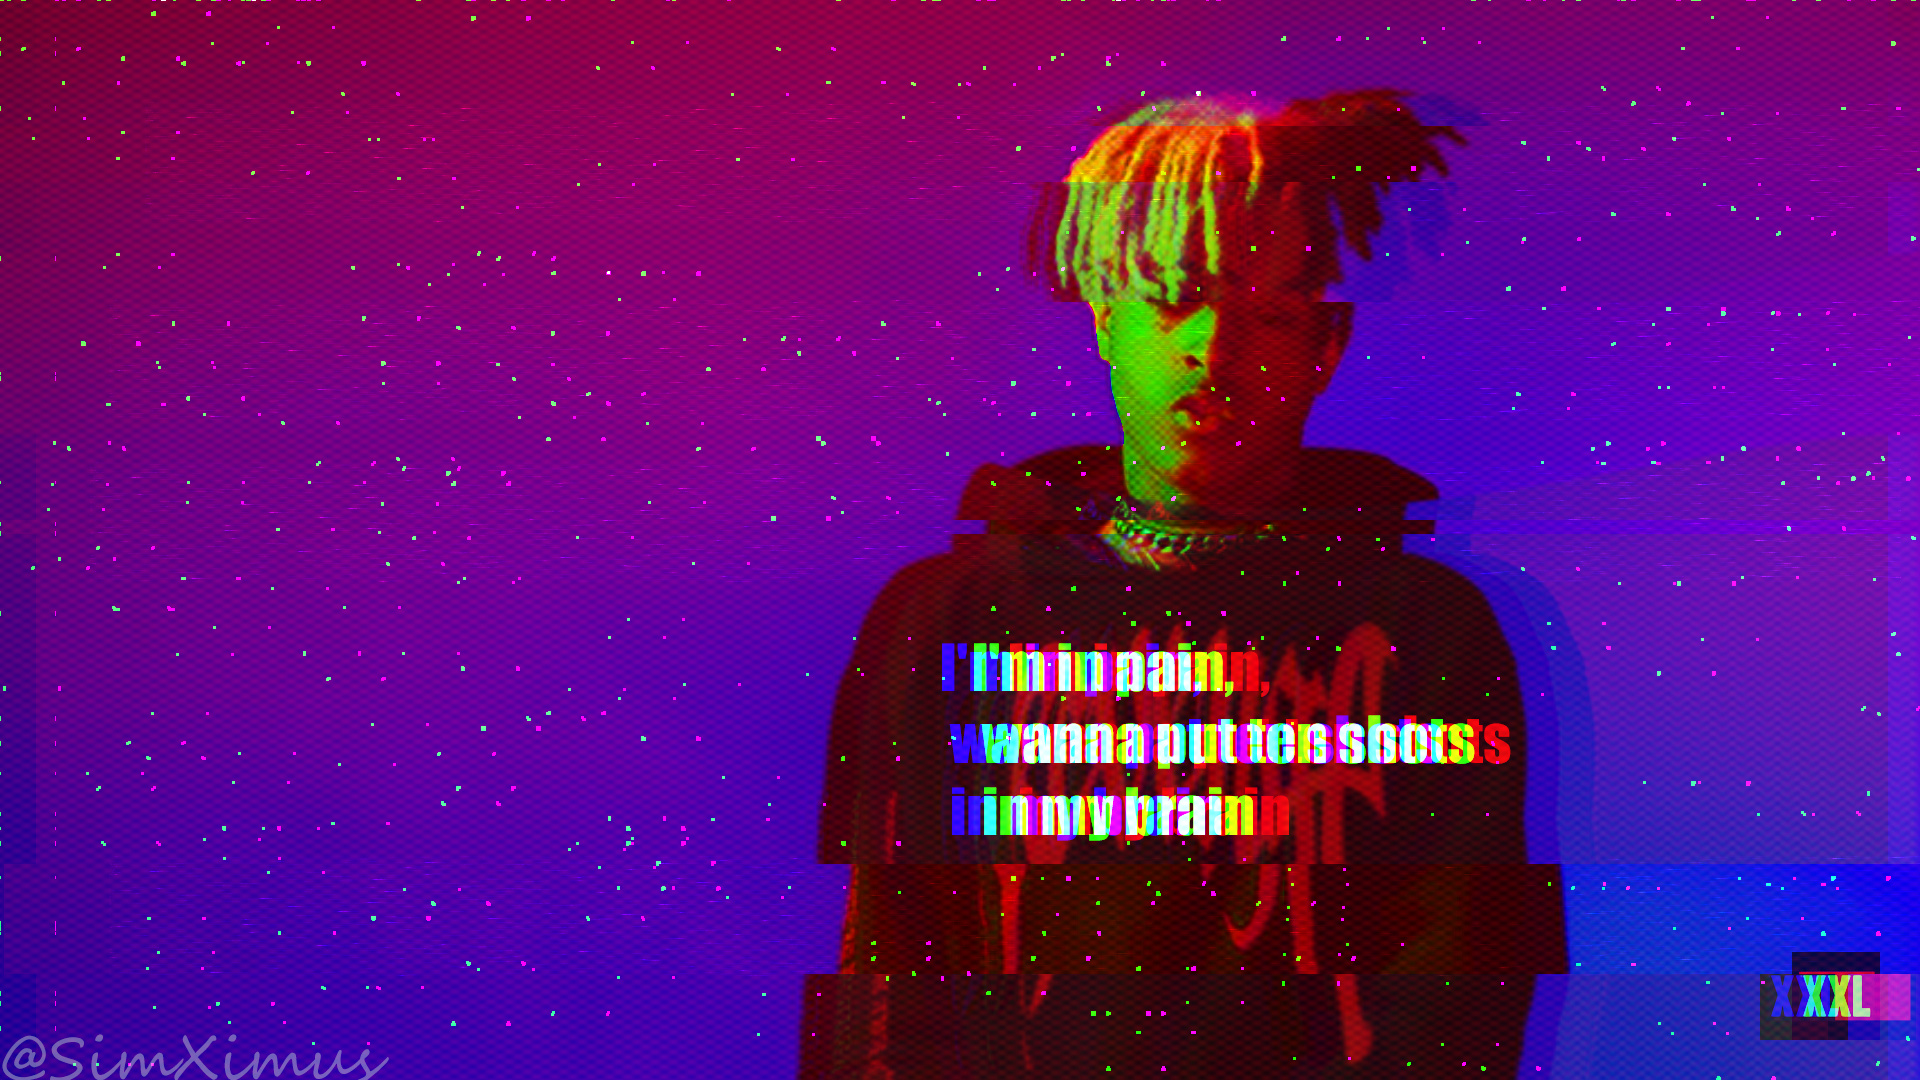 Xxxtentacion Wallpaper With Gllitch Effect And Lyrics From